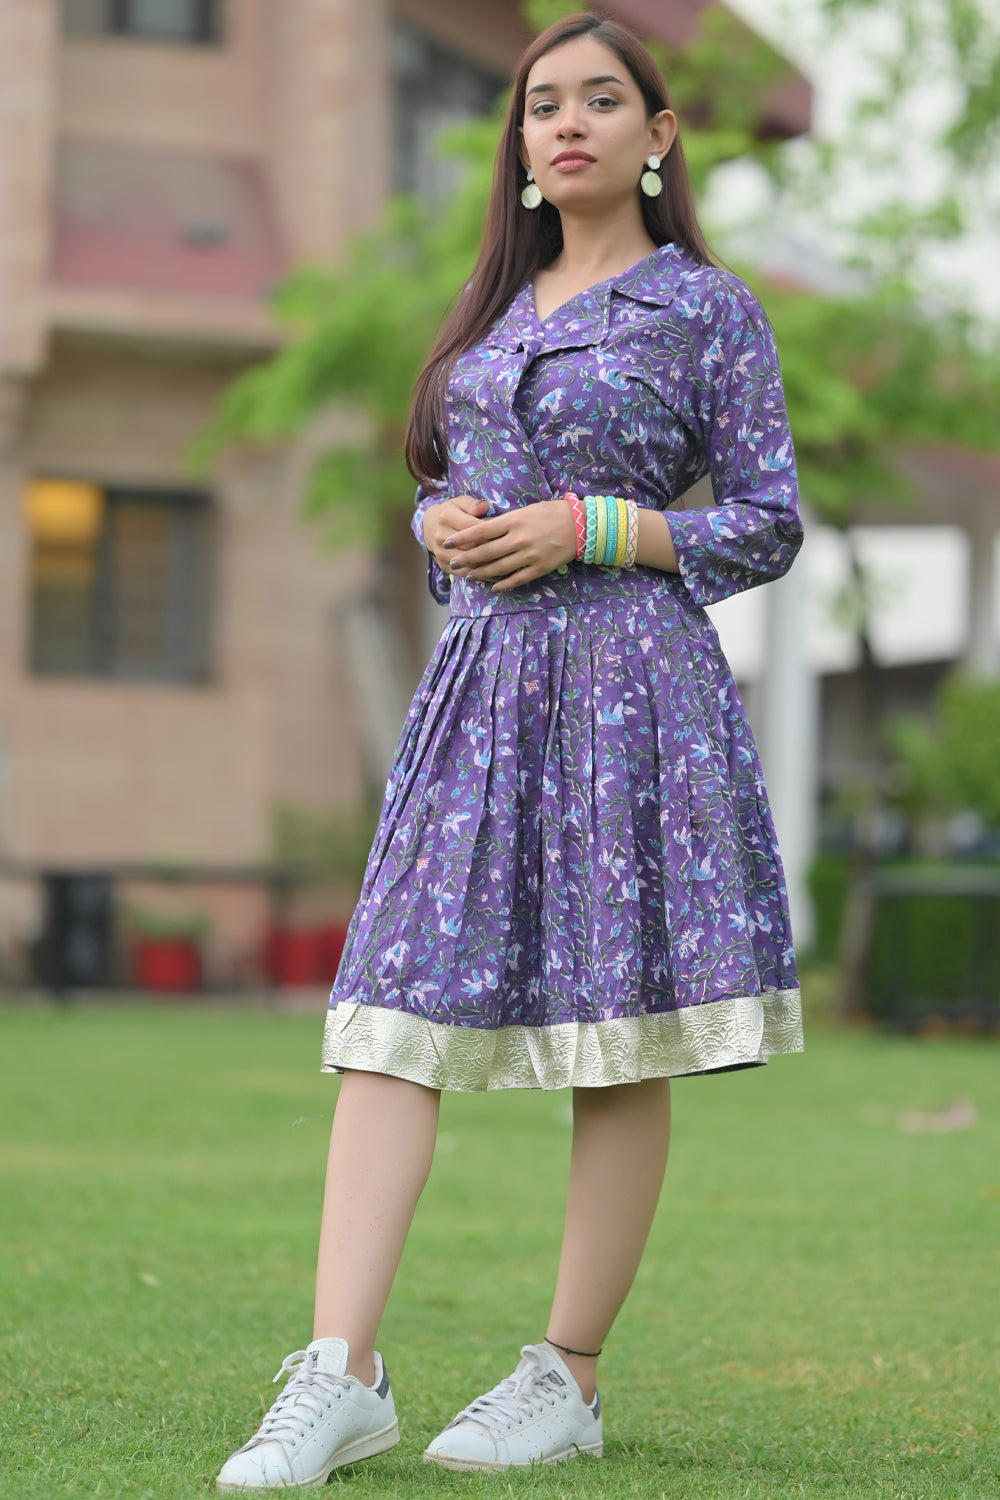 Jamun Brunch dress with Collar and Lace detailing, in Hand Block Printed Cotton | Made to Order